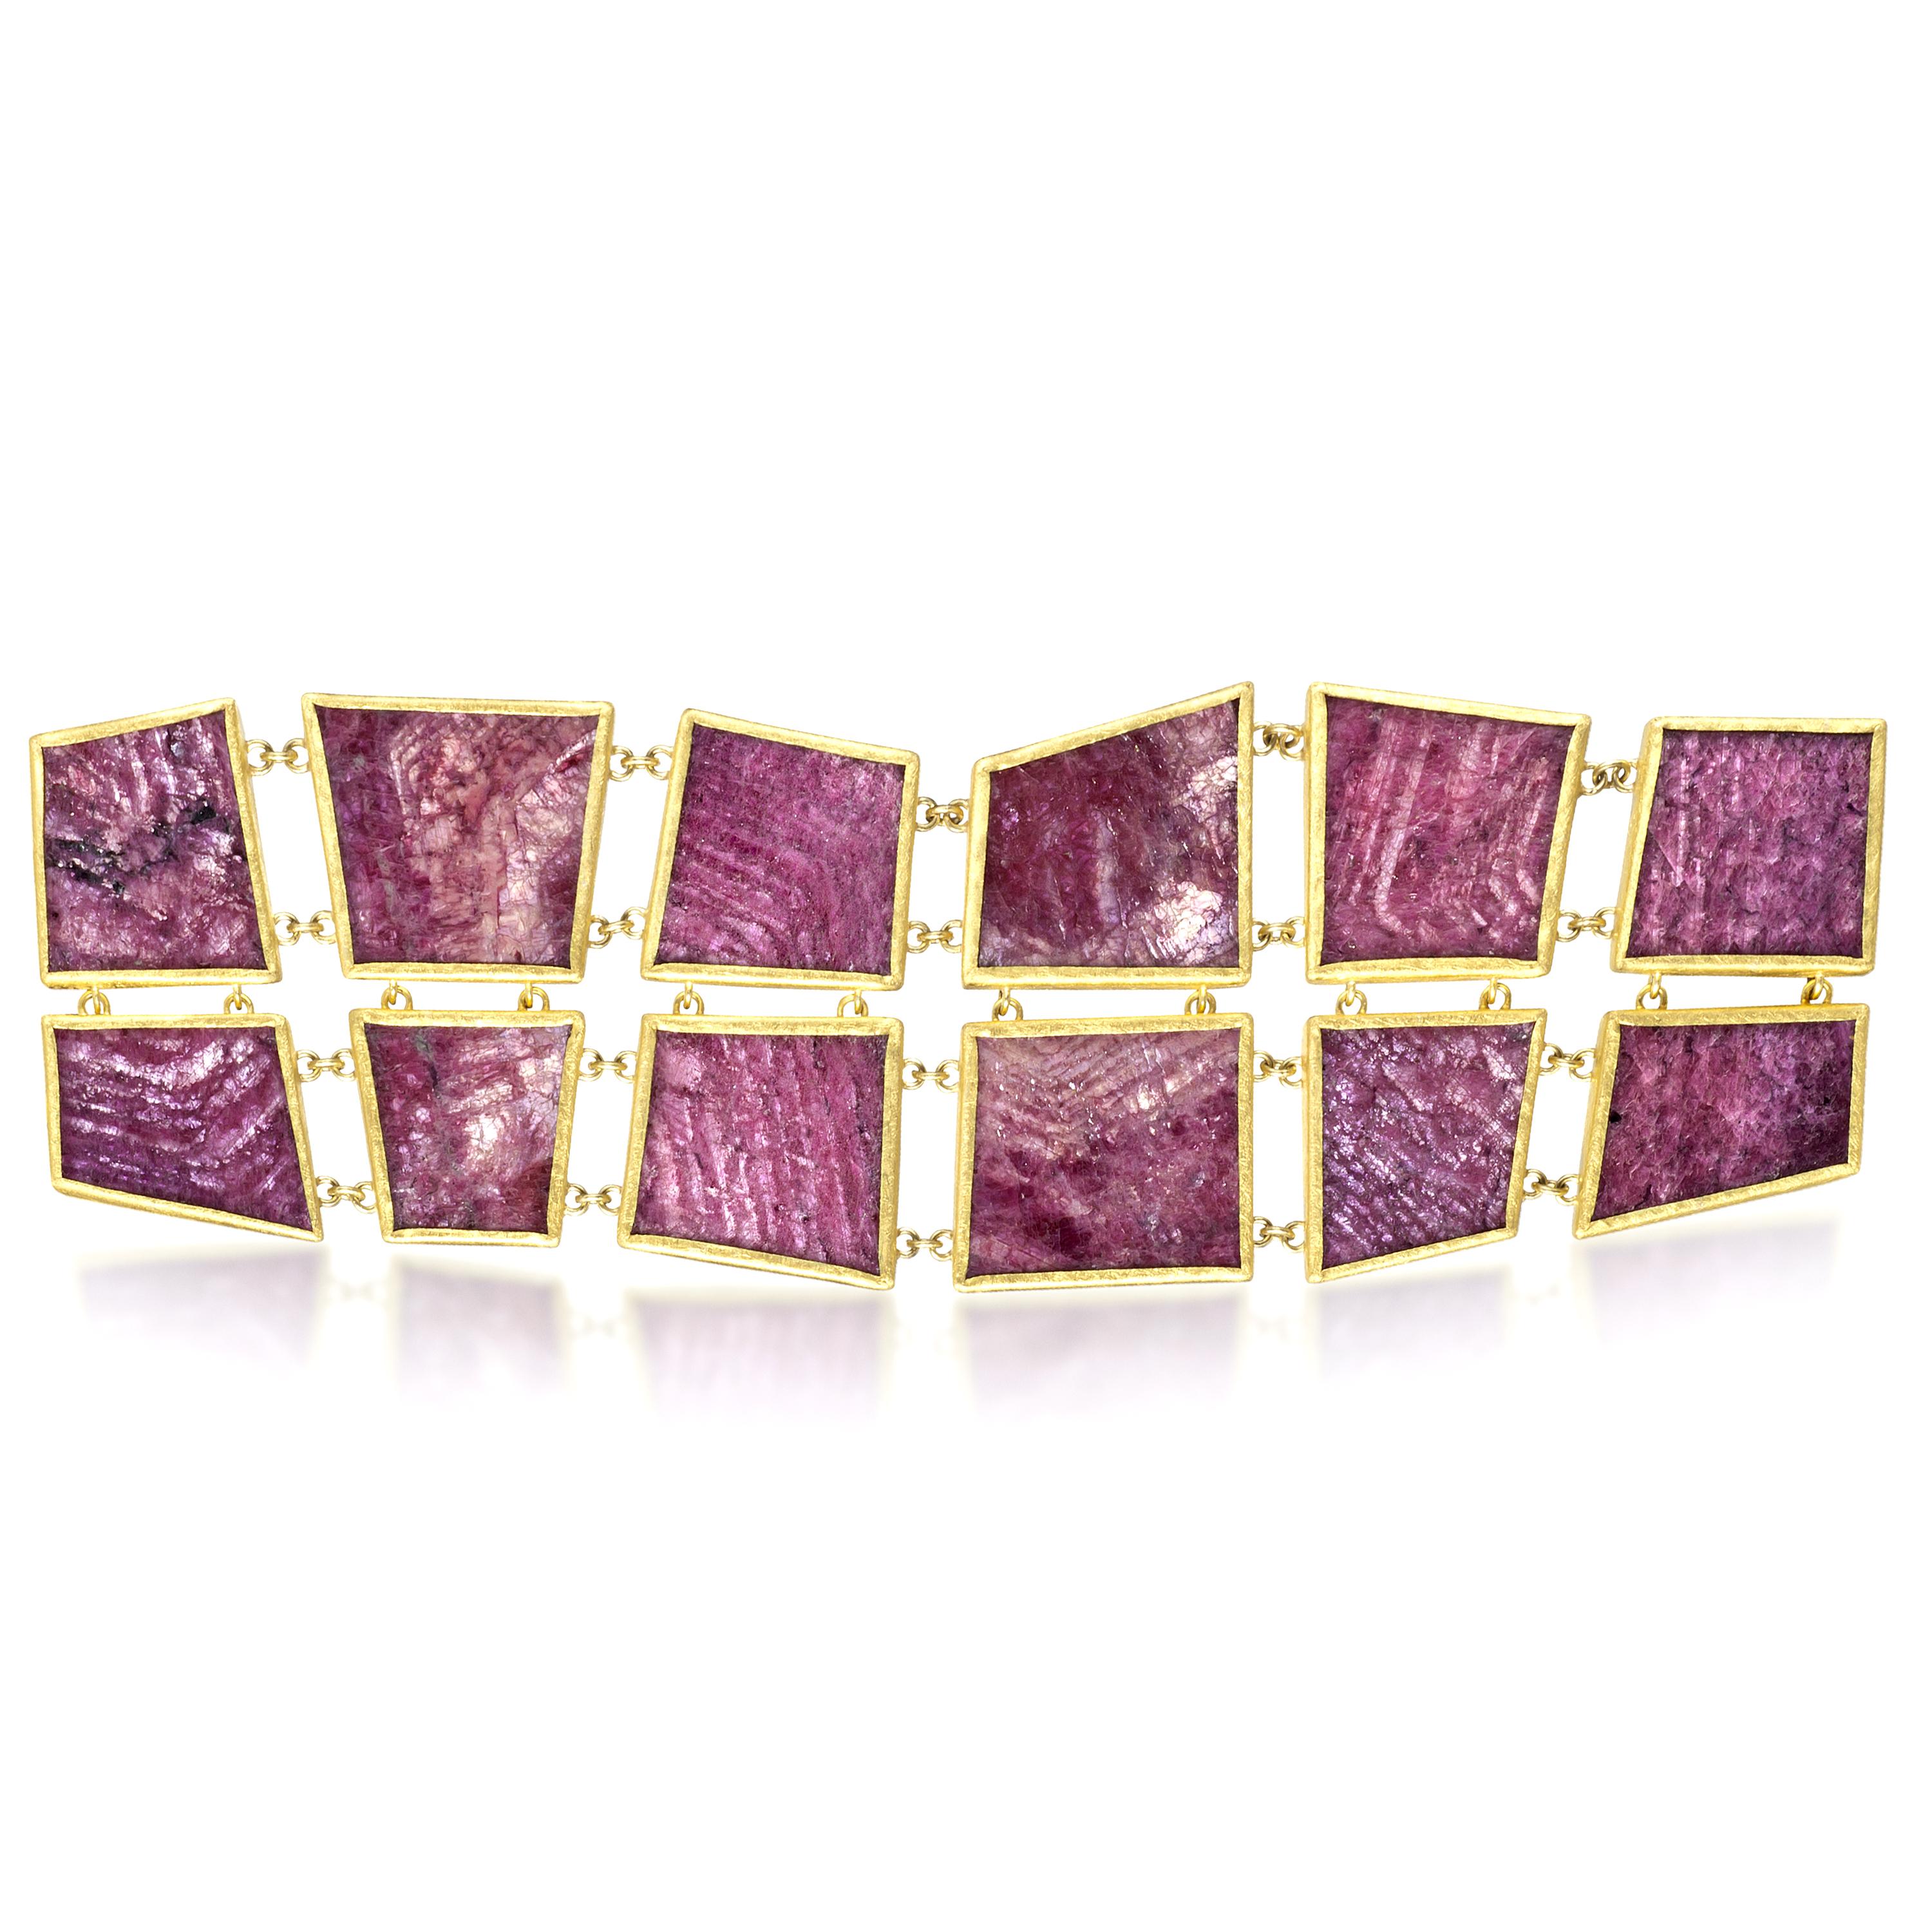 One of a Kind Ruby Slice Bracelet handcrafted by renowned jewelry artist Petra Class featuring two rows of ruby slices totaling 340 carats set in 22k yellow gold with an 18k gold clasp. Stamped and hallmarked. 